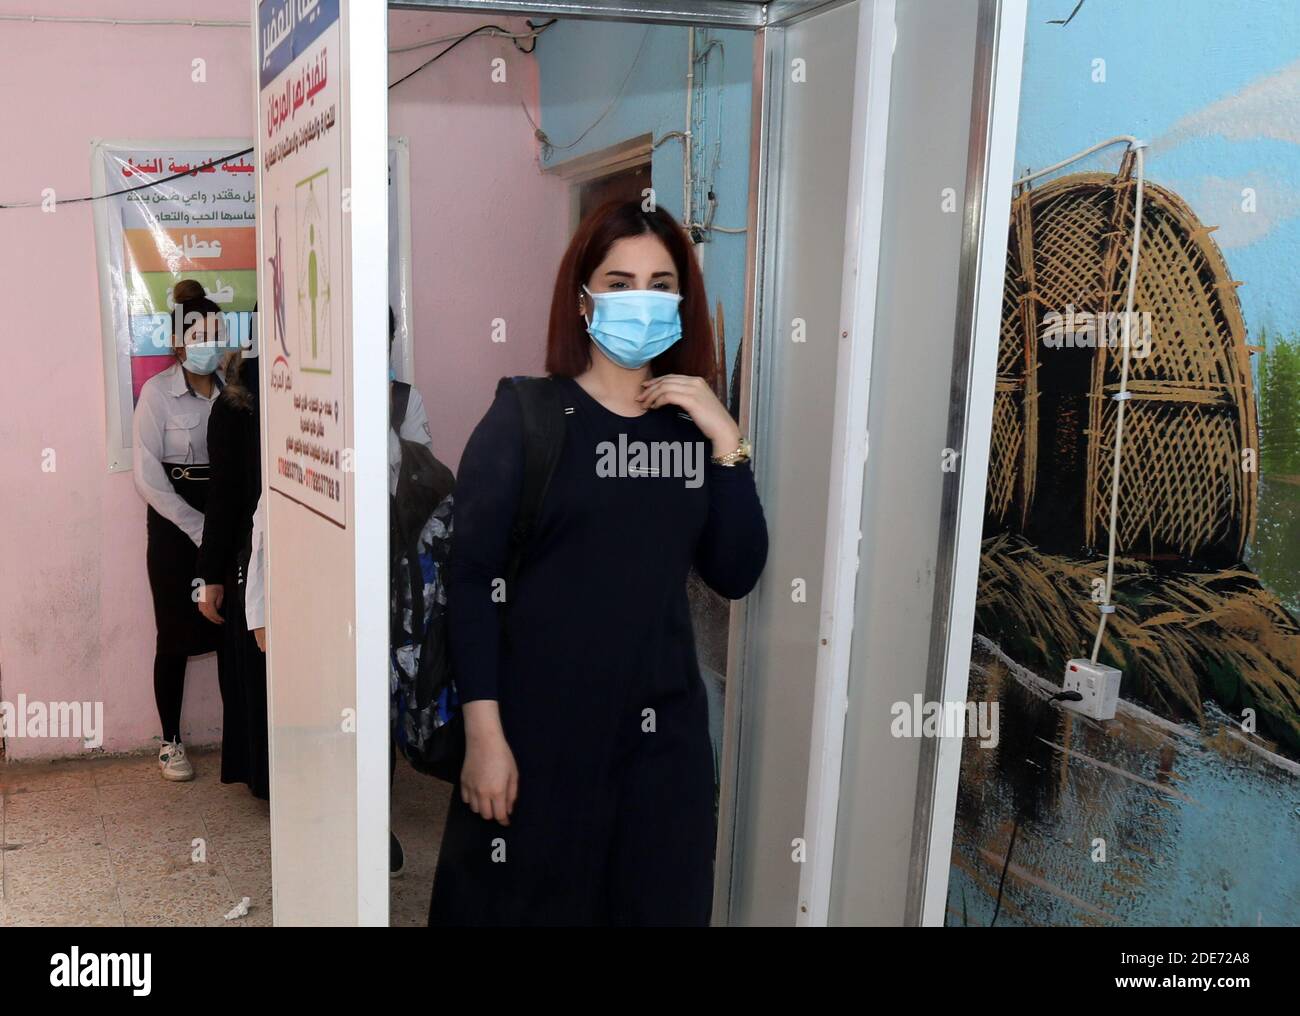 Baghdad. 29th Nov, 2020. Students go through disinfection procedures before entering classrooms at a school in Baghdad, Iraq, on Nov. 29, 2020. The Iraqi Health Ministry reported on Sunday 1,614 new COVID-19 cases, bringing the nationwide infections to 550,435. New school year has started across Iraq on Nov. 29. Credit: Xinhua/Alamy Live News Stock Photo